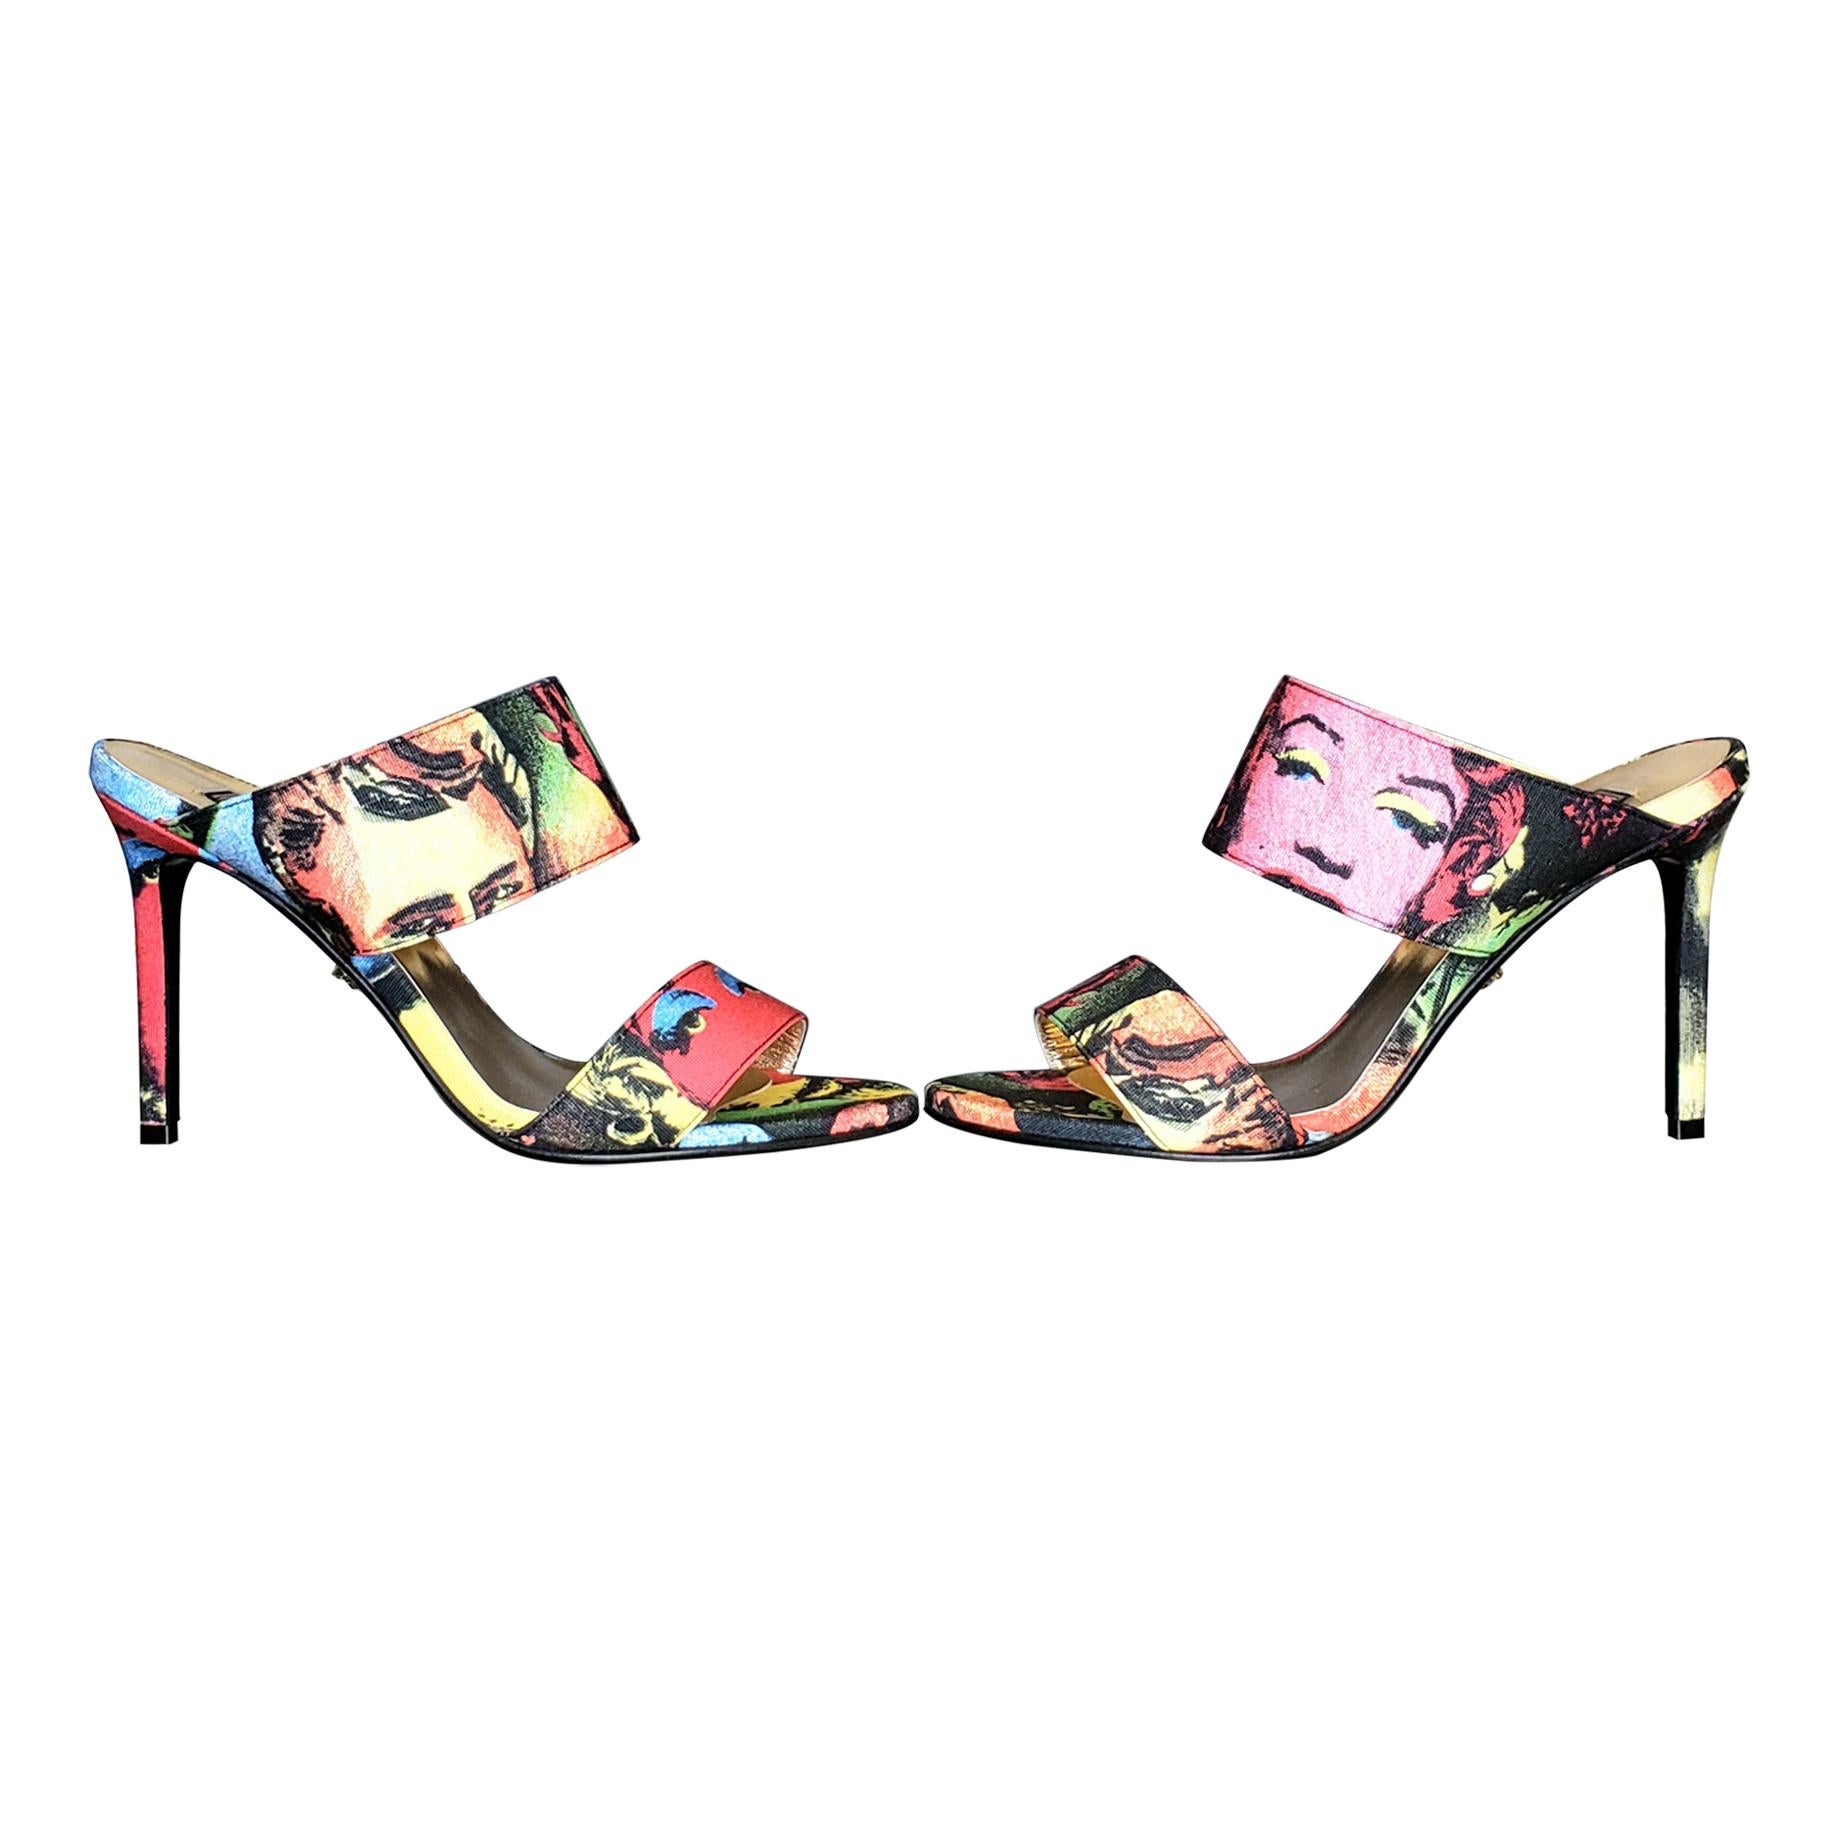 S/S 18 L# 52 VERSACE MULTI COLOR MARILYN MONROE TRIBUTE 1990 size 37 - 7 For Sale